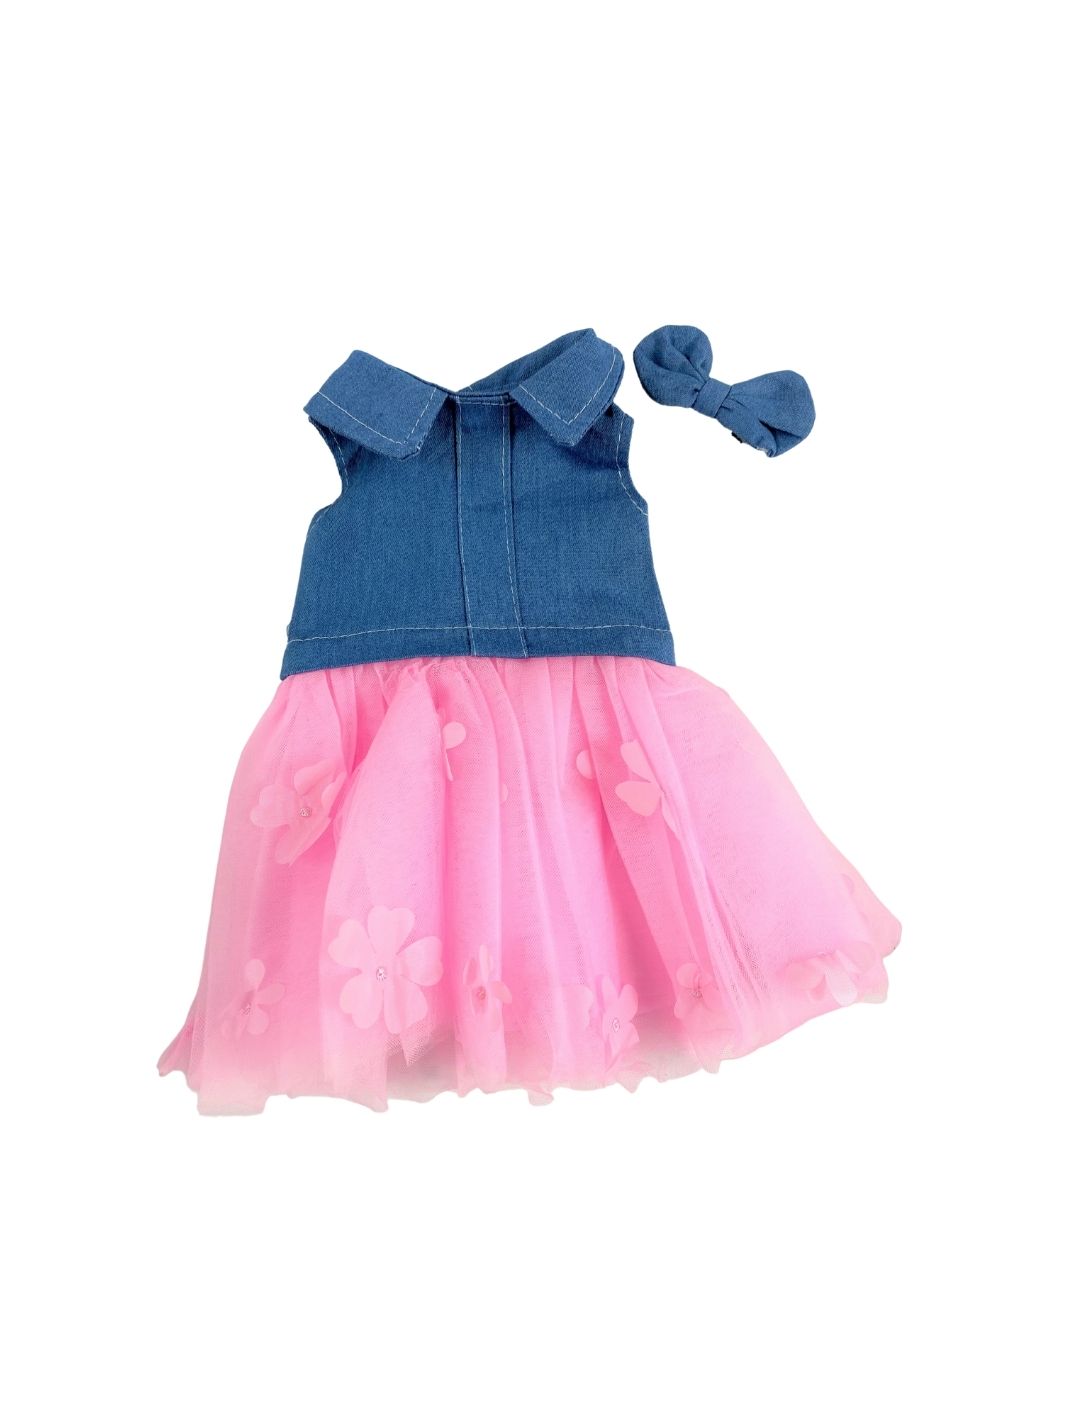 Pink Denim Tutu Dress & Bow - For 18" dolls: Outfit Only-Accessories-Beautiful Curly Me